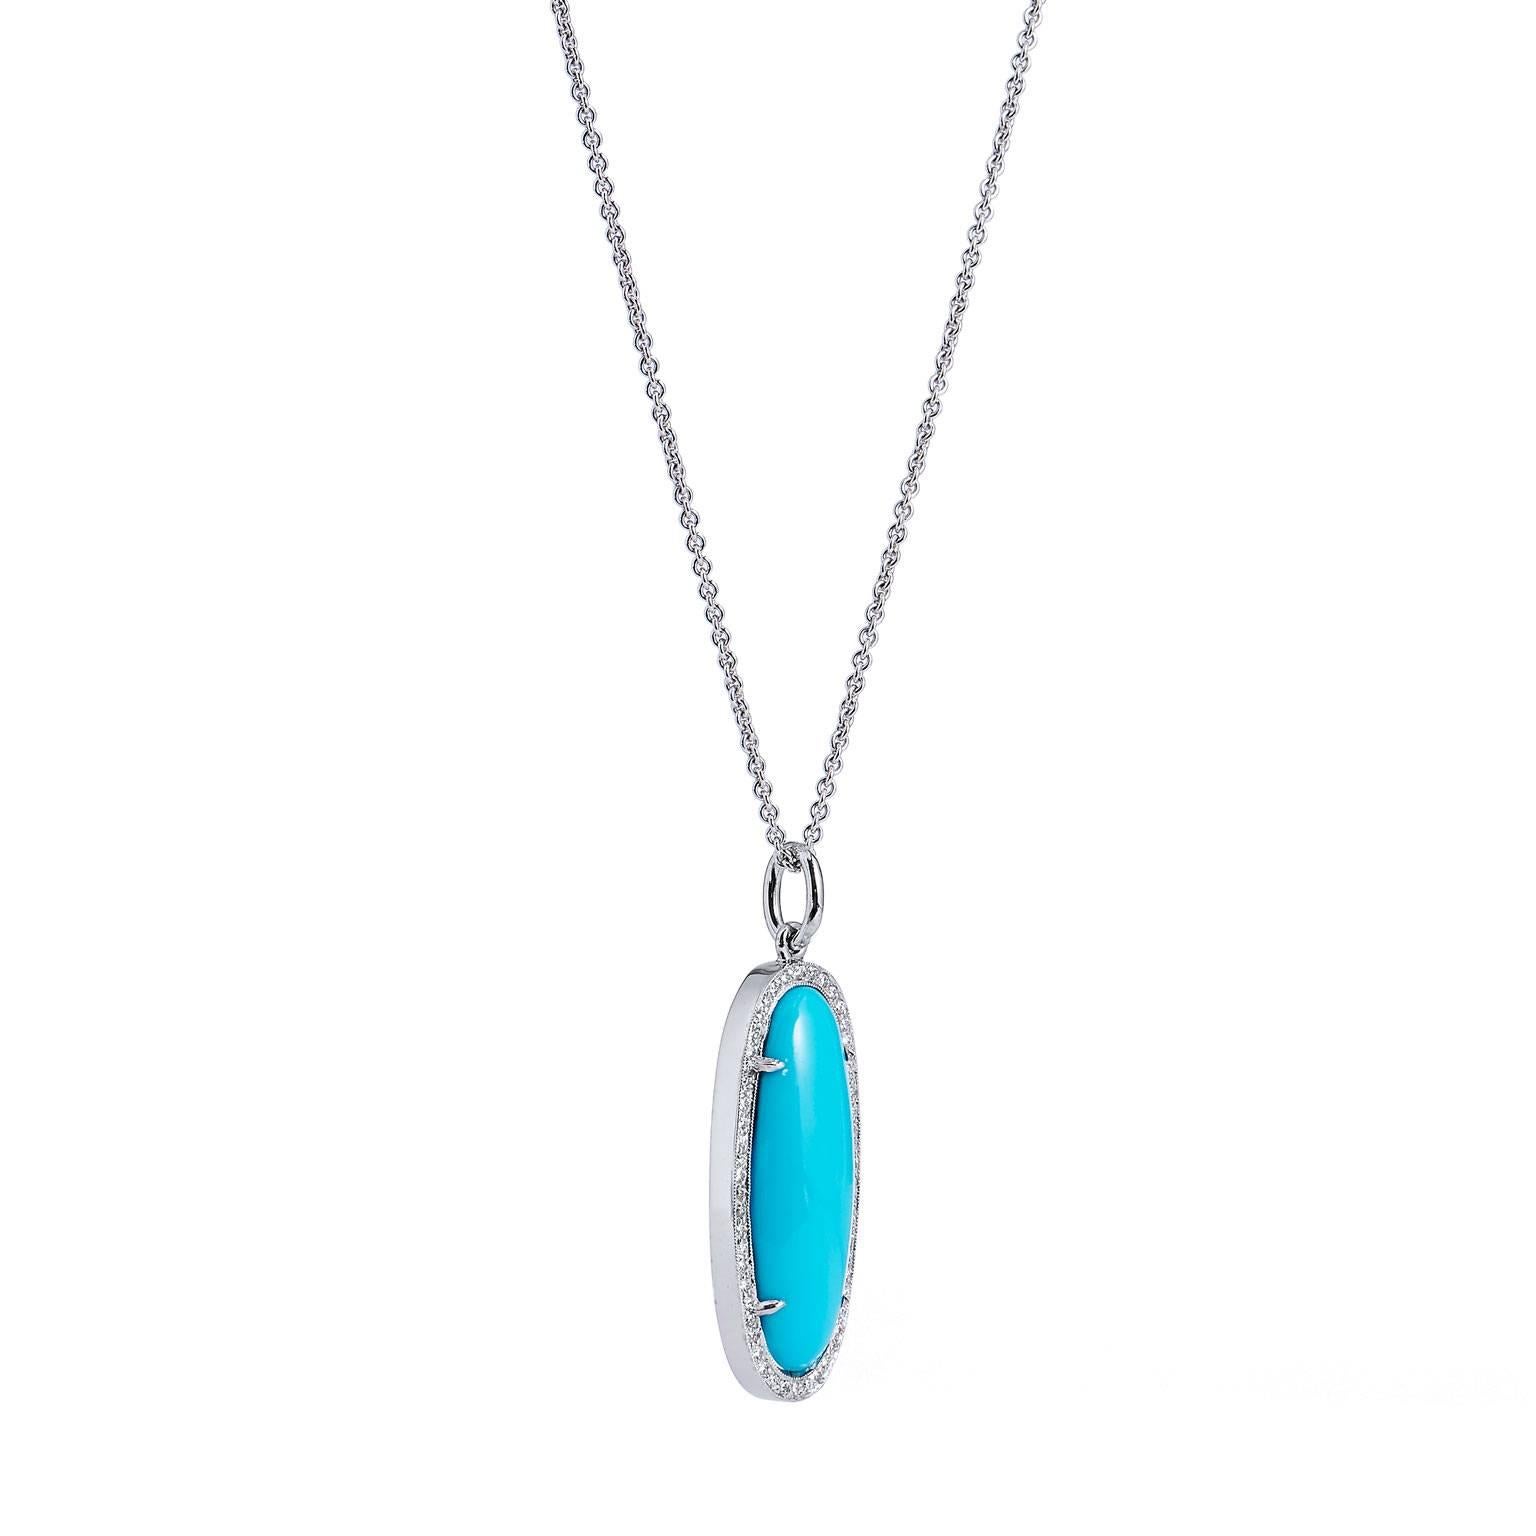 A striking synthetic turquoise is set at center and fashioned in 18 karat white 
gold in this handcrafted H and H pendant. Turquoise is a stone of protection- strong and opaque, yet soothing to the touch. It appears as if though it was carved from